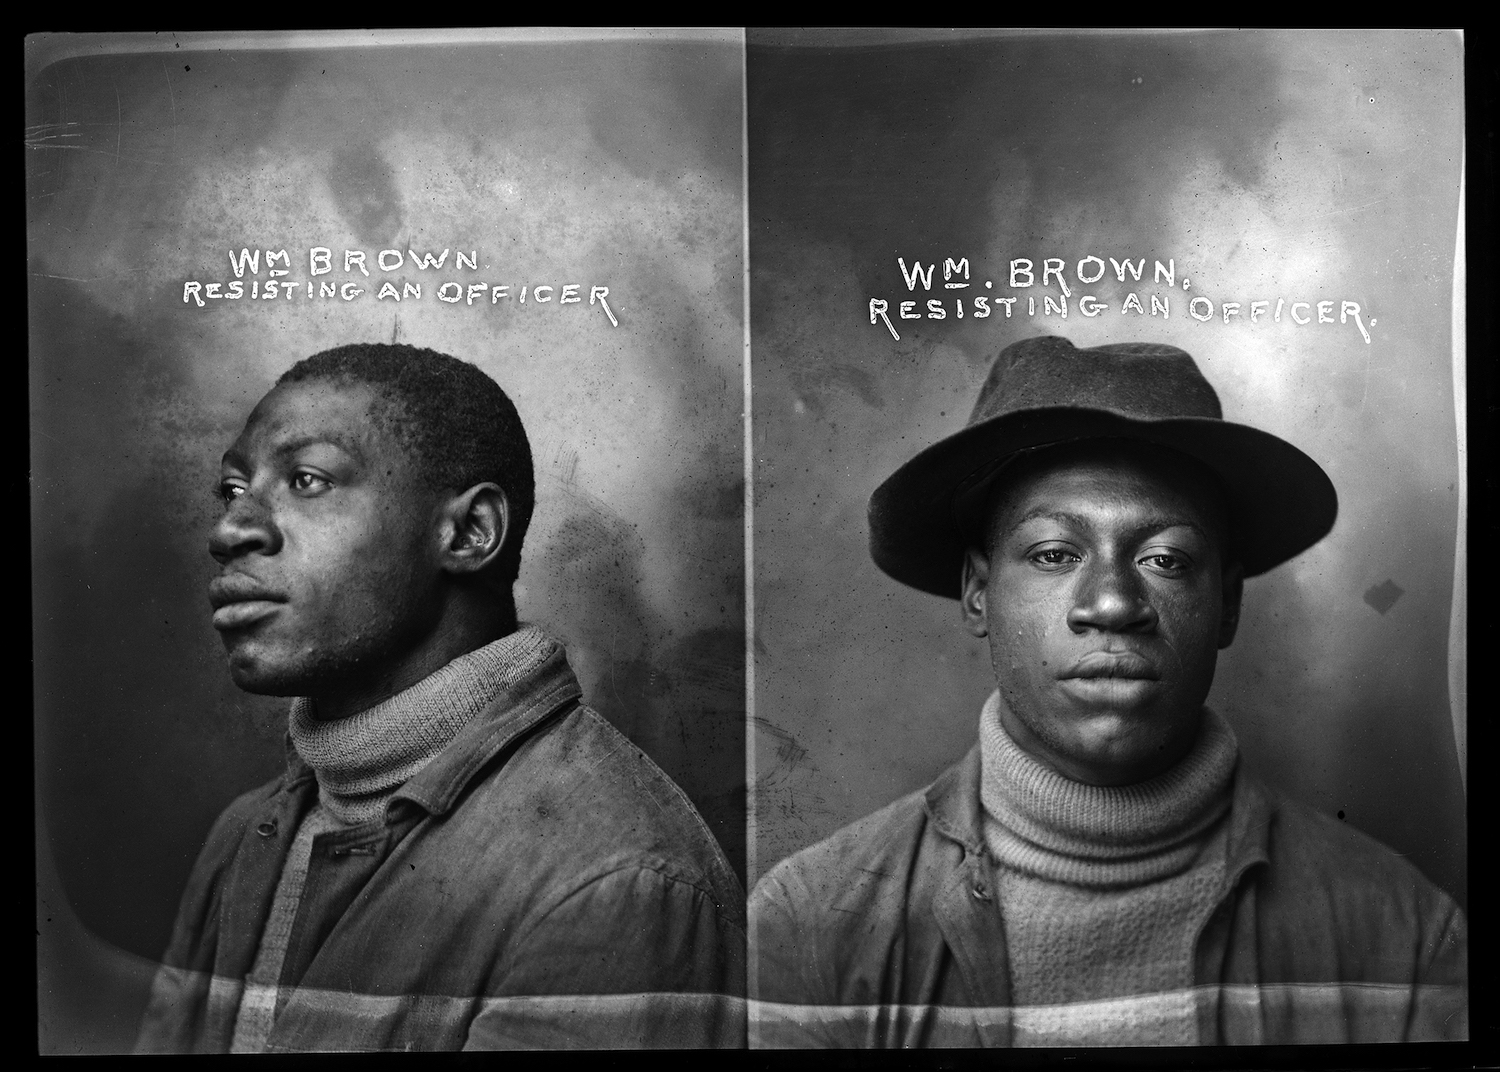 Arne Svenson, Wm. Brown from the series Prisoners, 1997/2019, Digital reproduction of glass plate negatives from early 20th c.